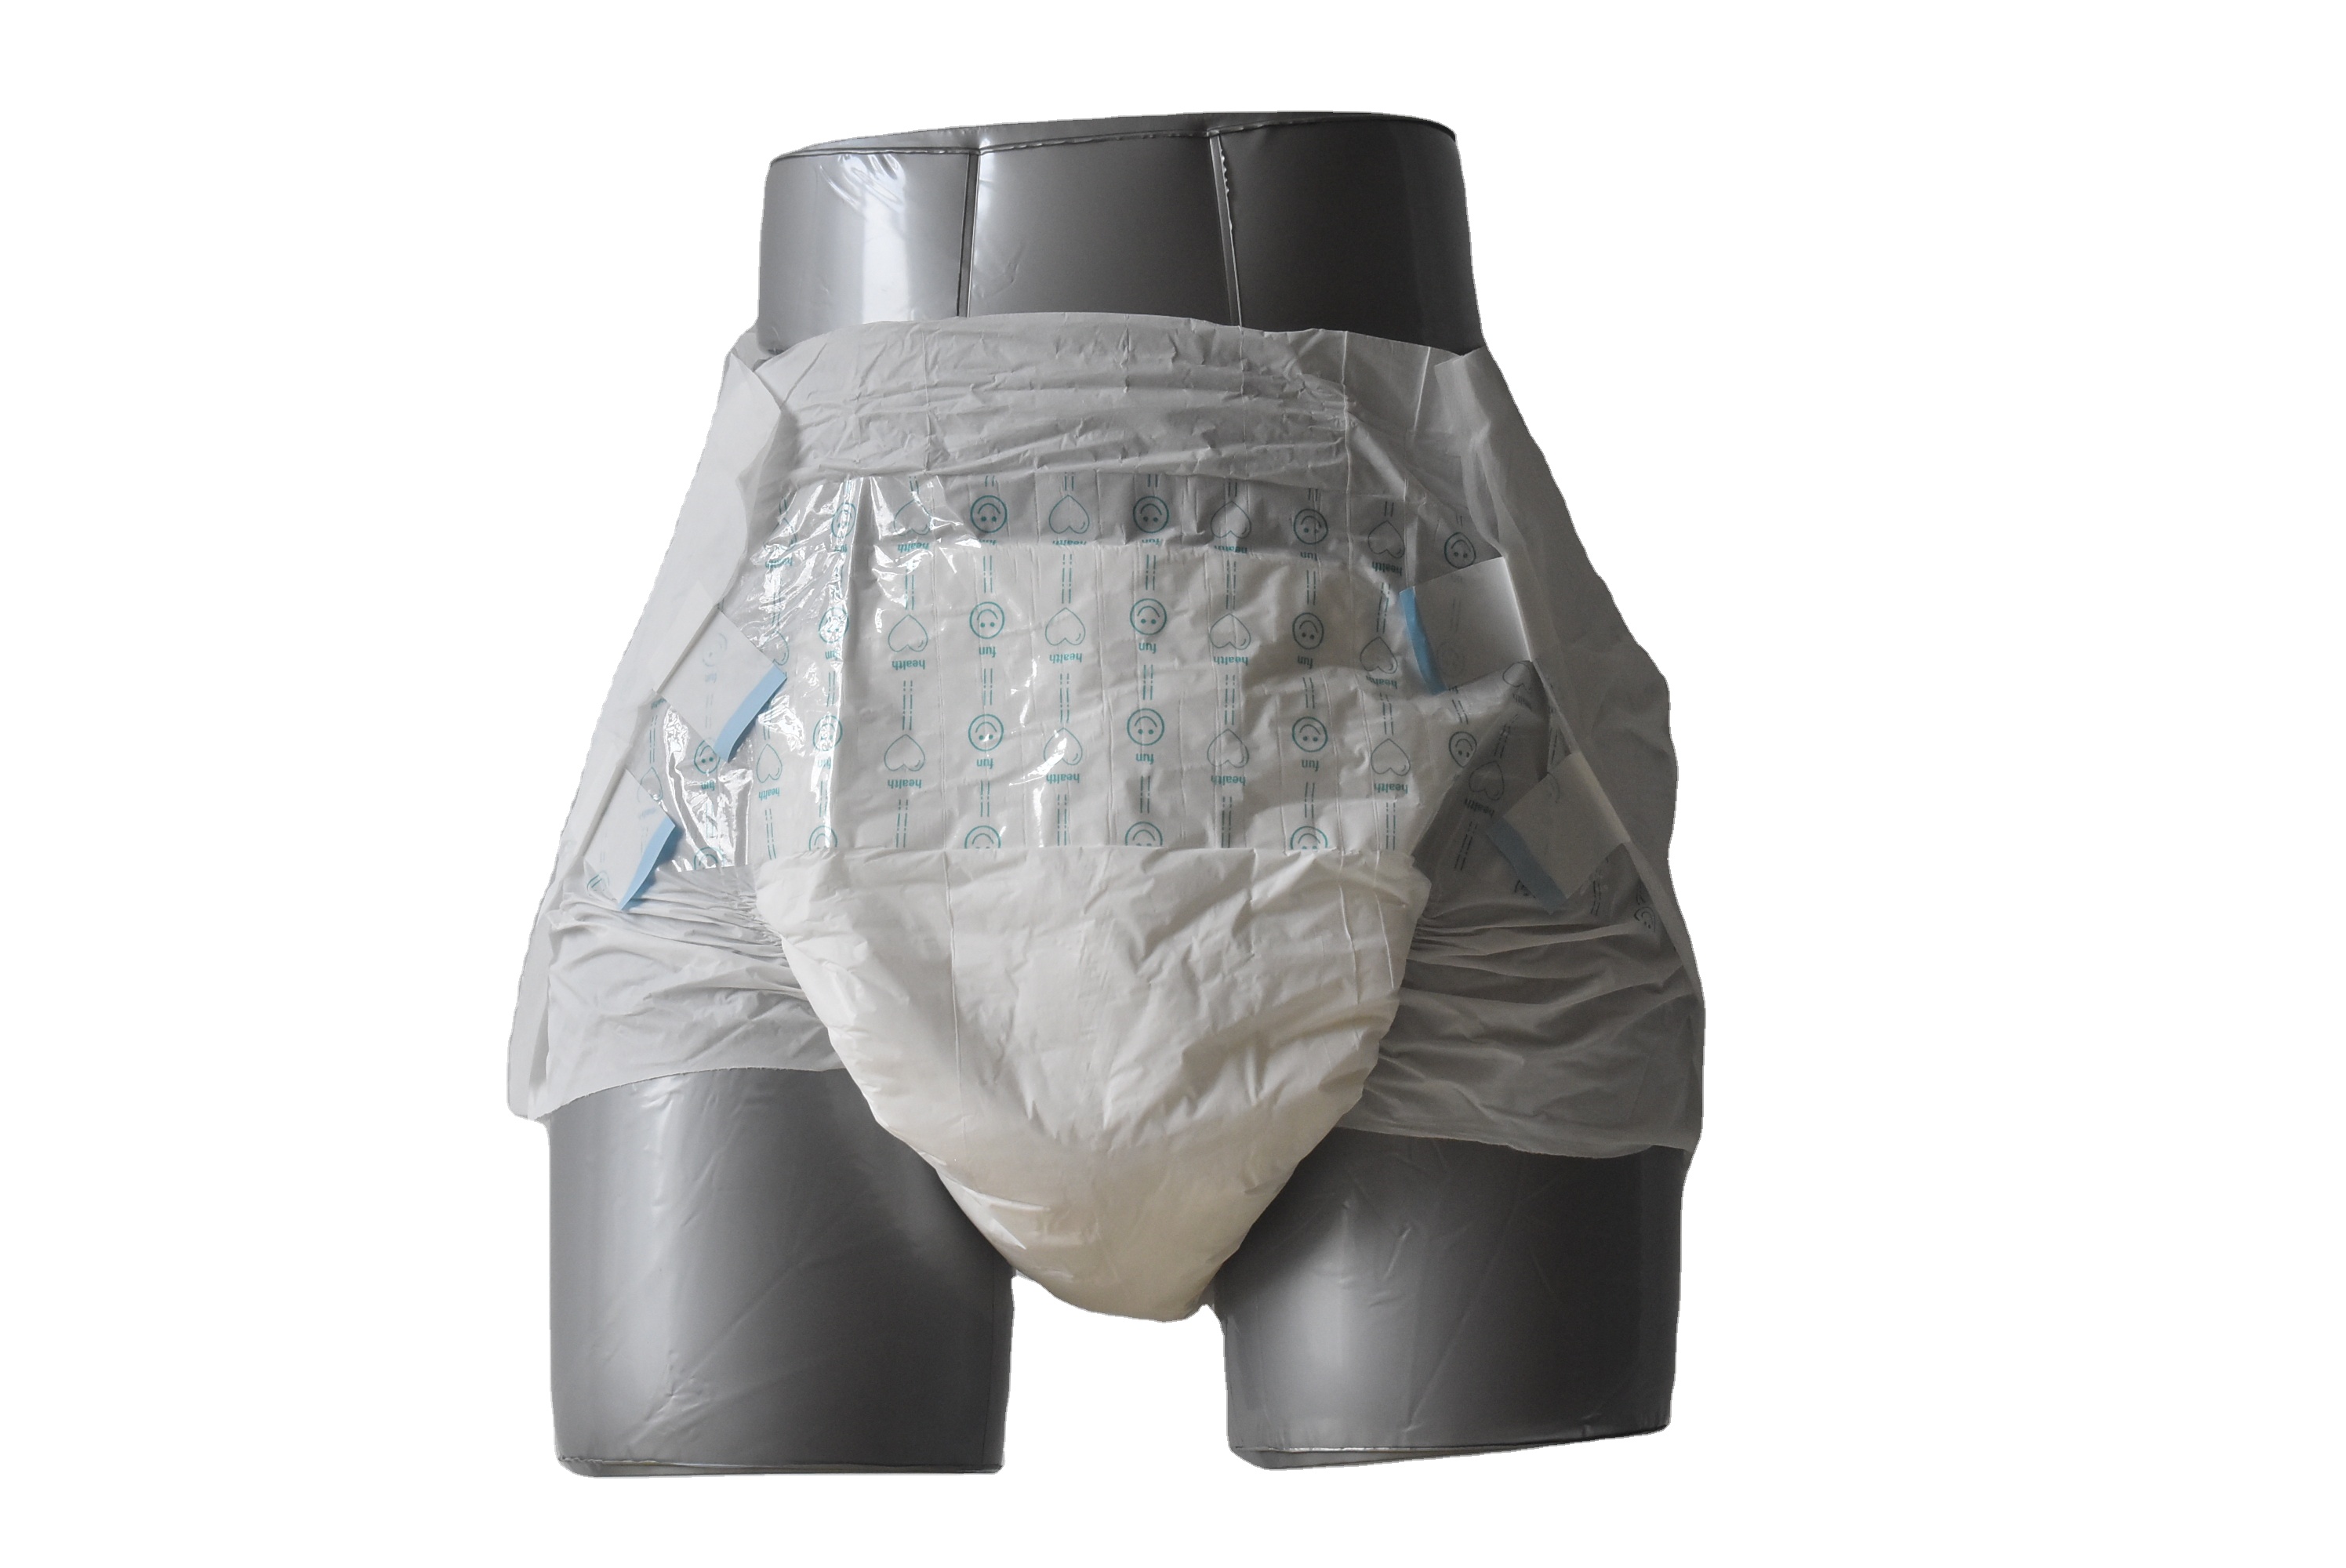 Factory wholesale price adult diaper OEM customized with super absorbency disposable elderly tape diaper for nursing care